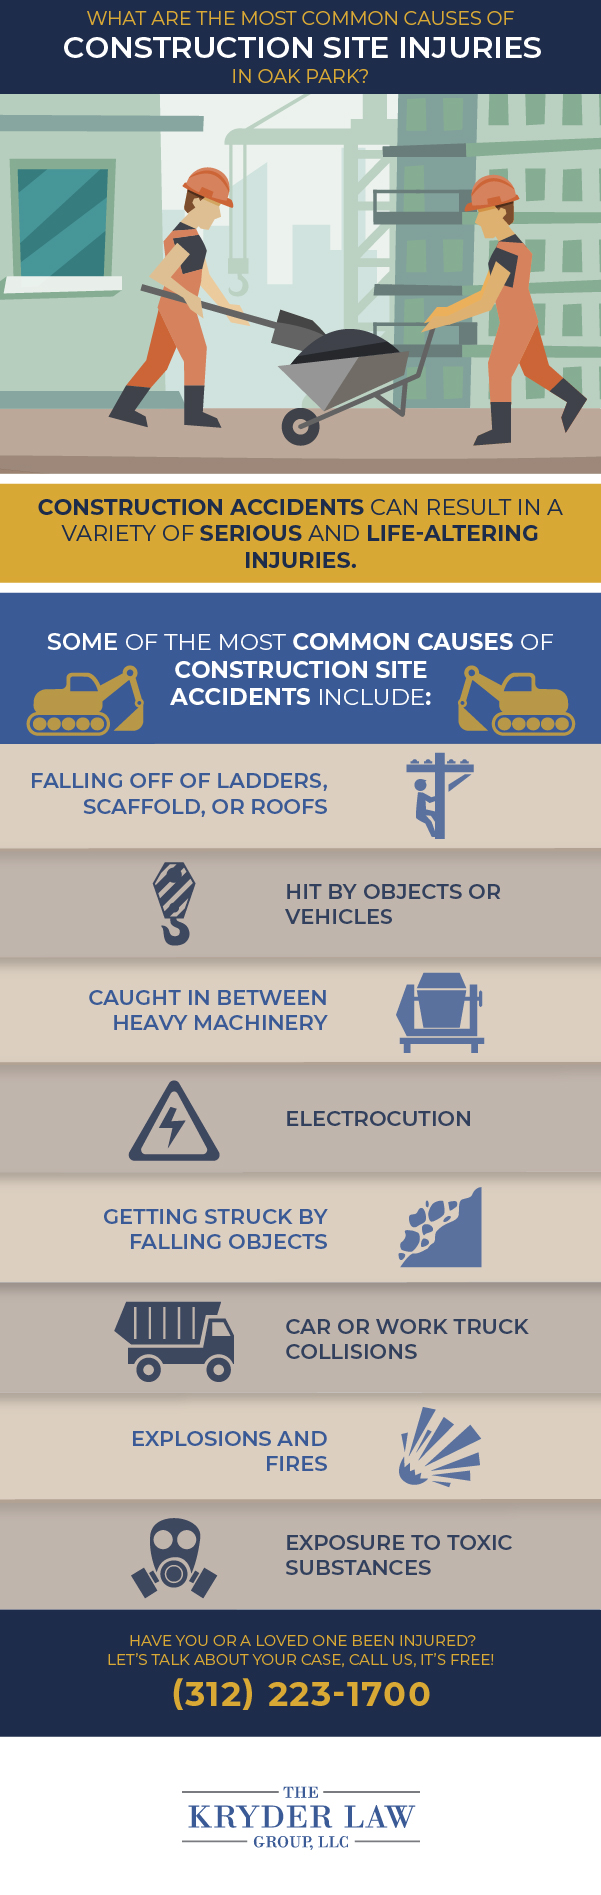 The Benefits of Hiring an Oak Park Construction Accident Lawyer Infographic